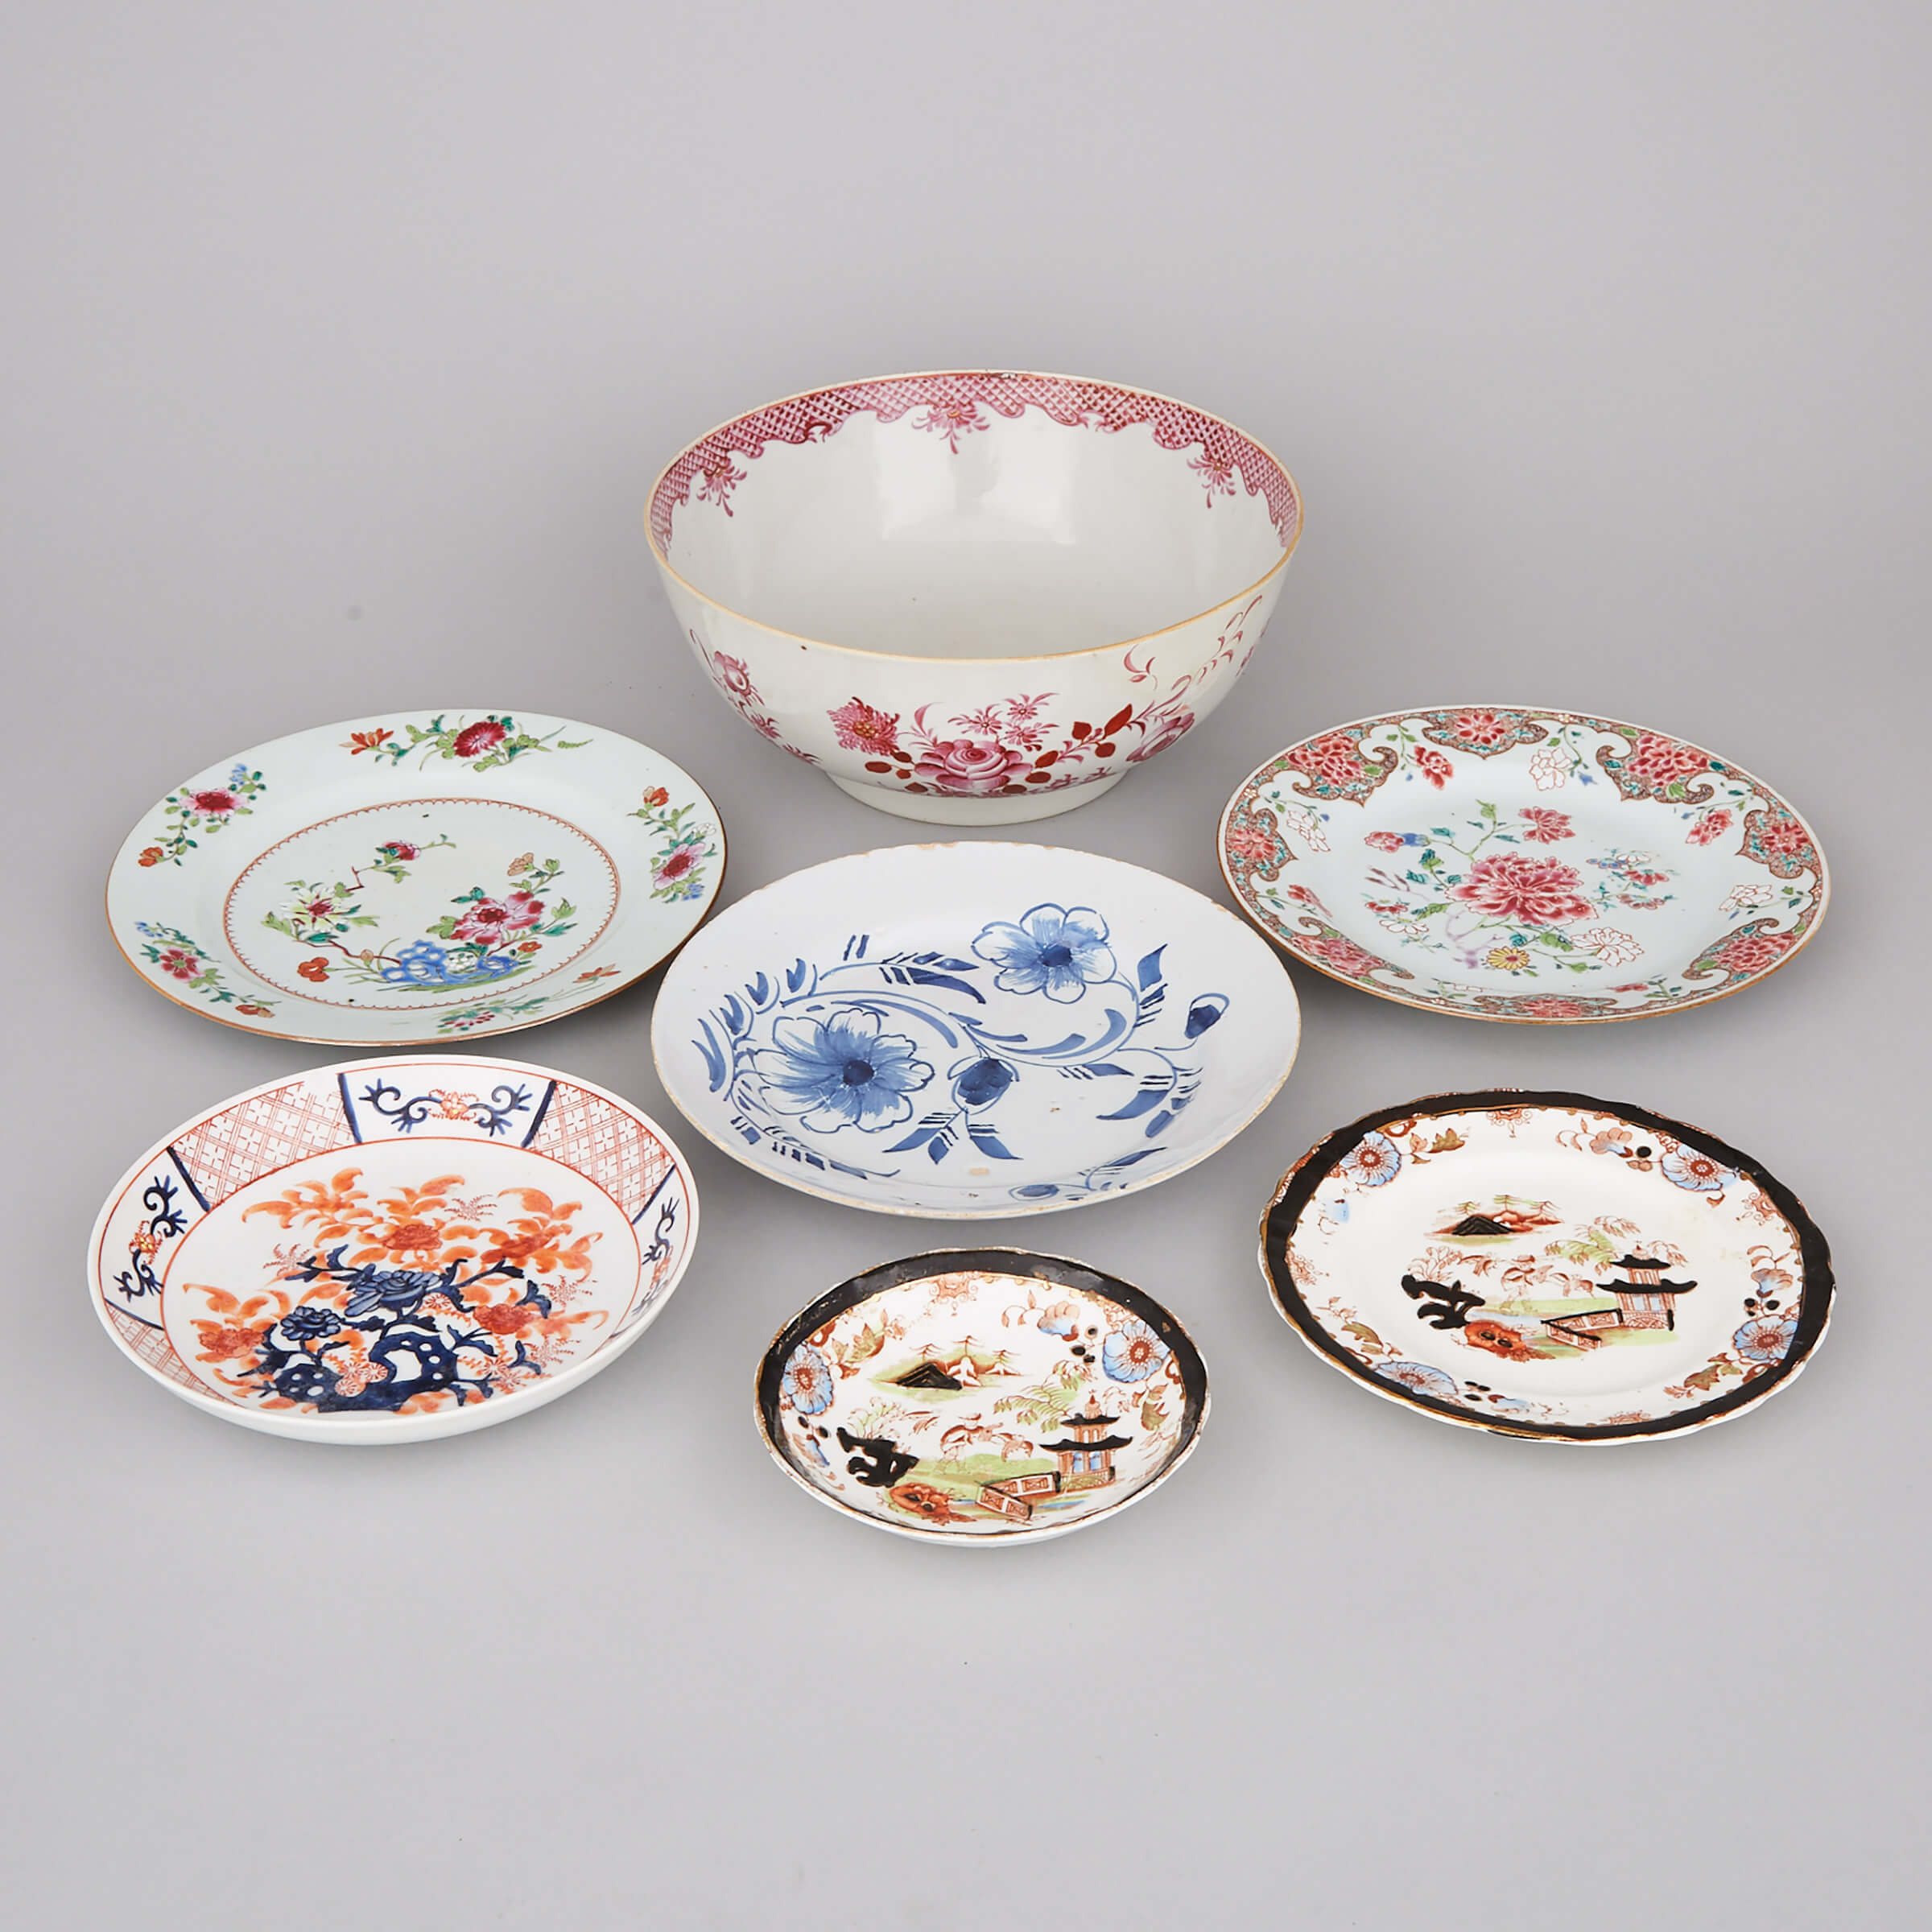 A Group of Seven Ceramic Wares, 18th Century and Later